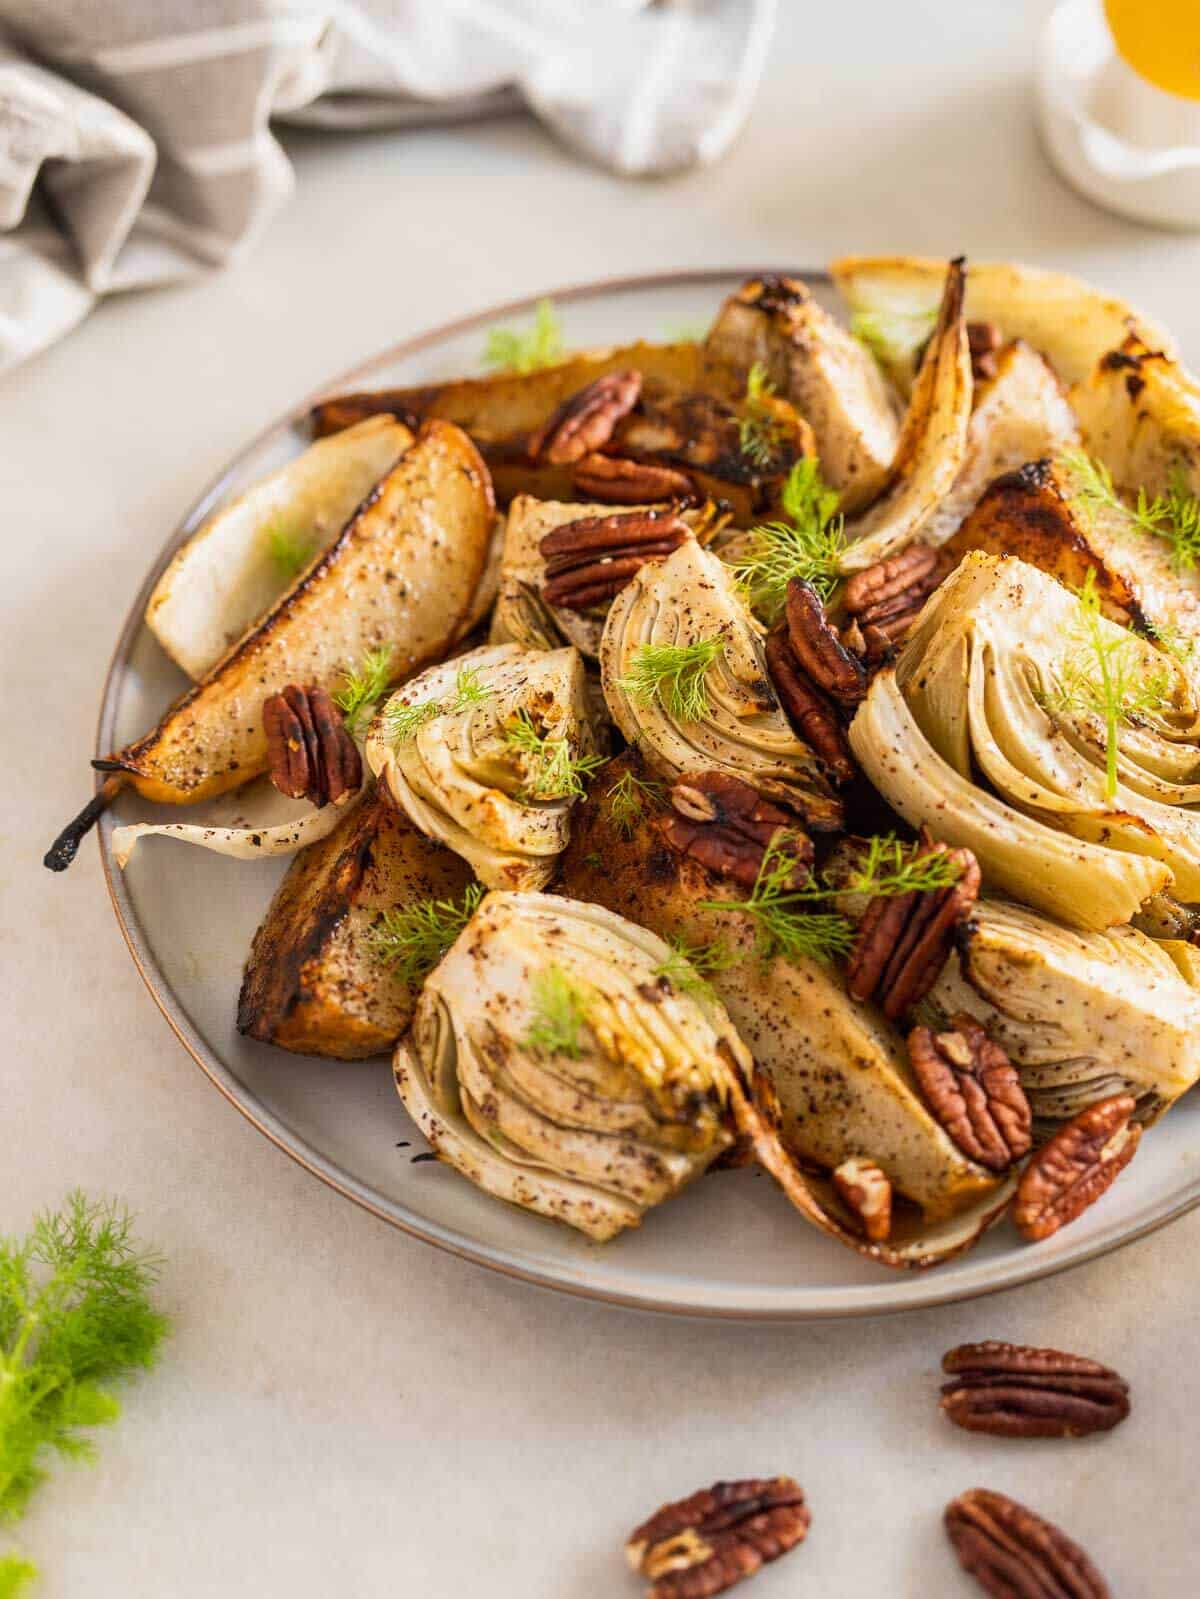 roasted pear and fennel salad with pecan nuts in serving plate.